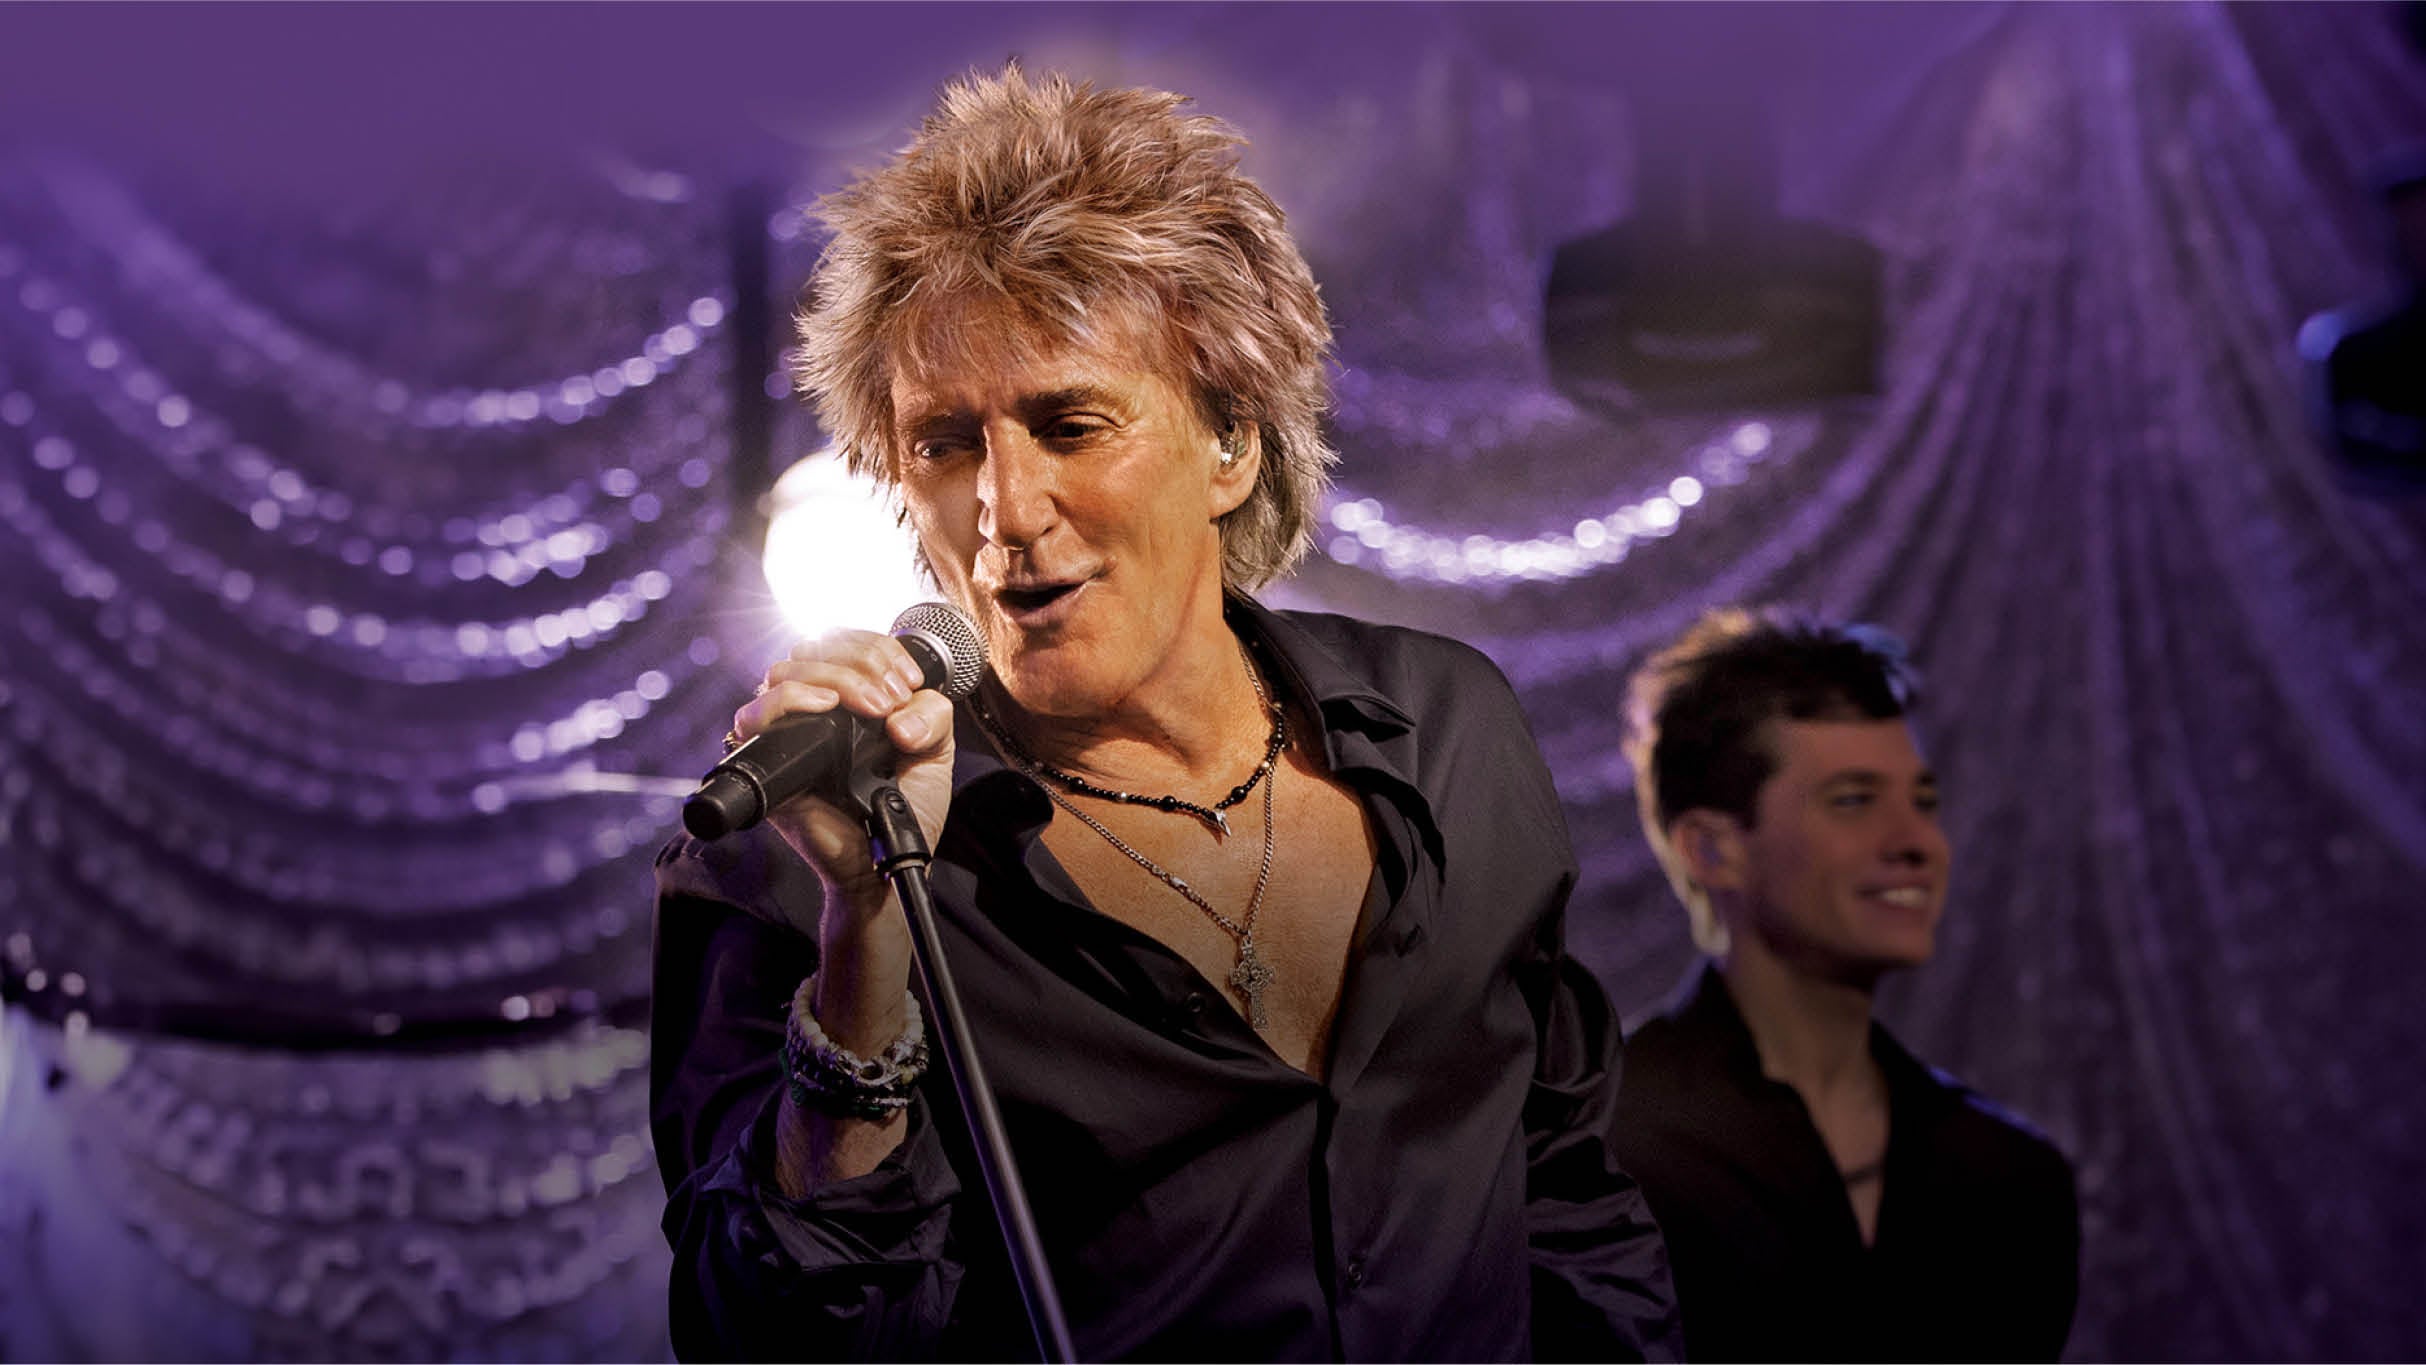 Ticket Reselling Rod Stewart: Live in Concert - One Last Time